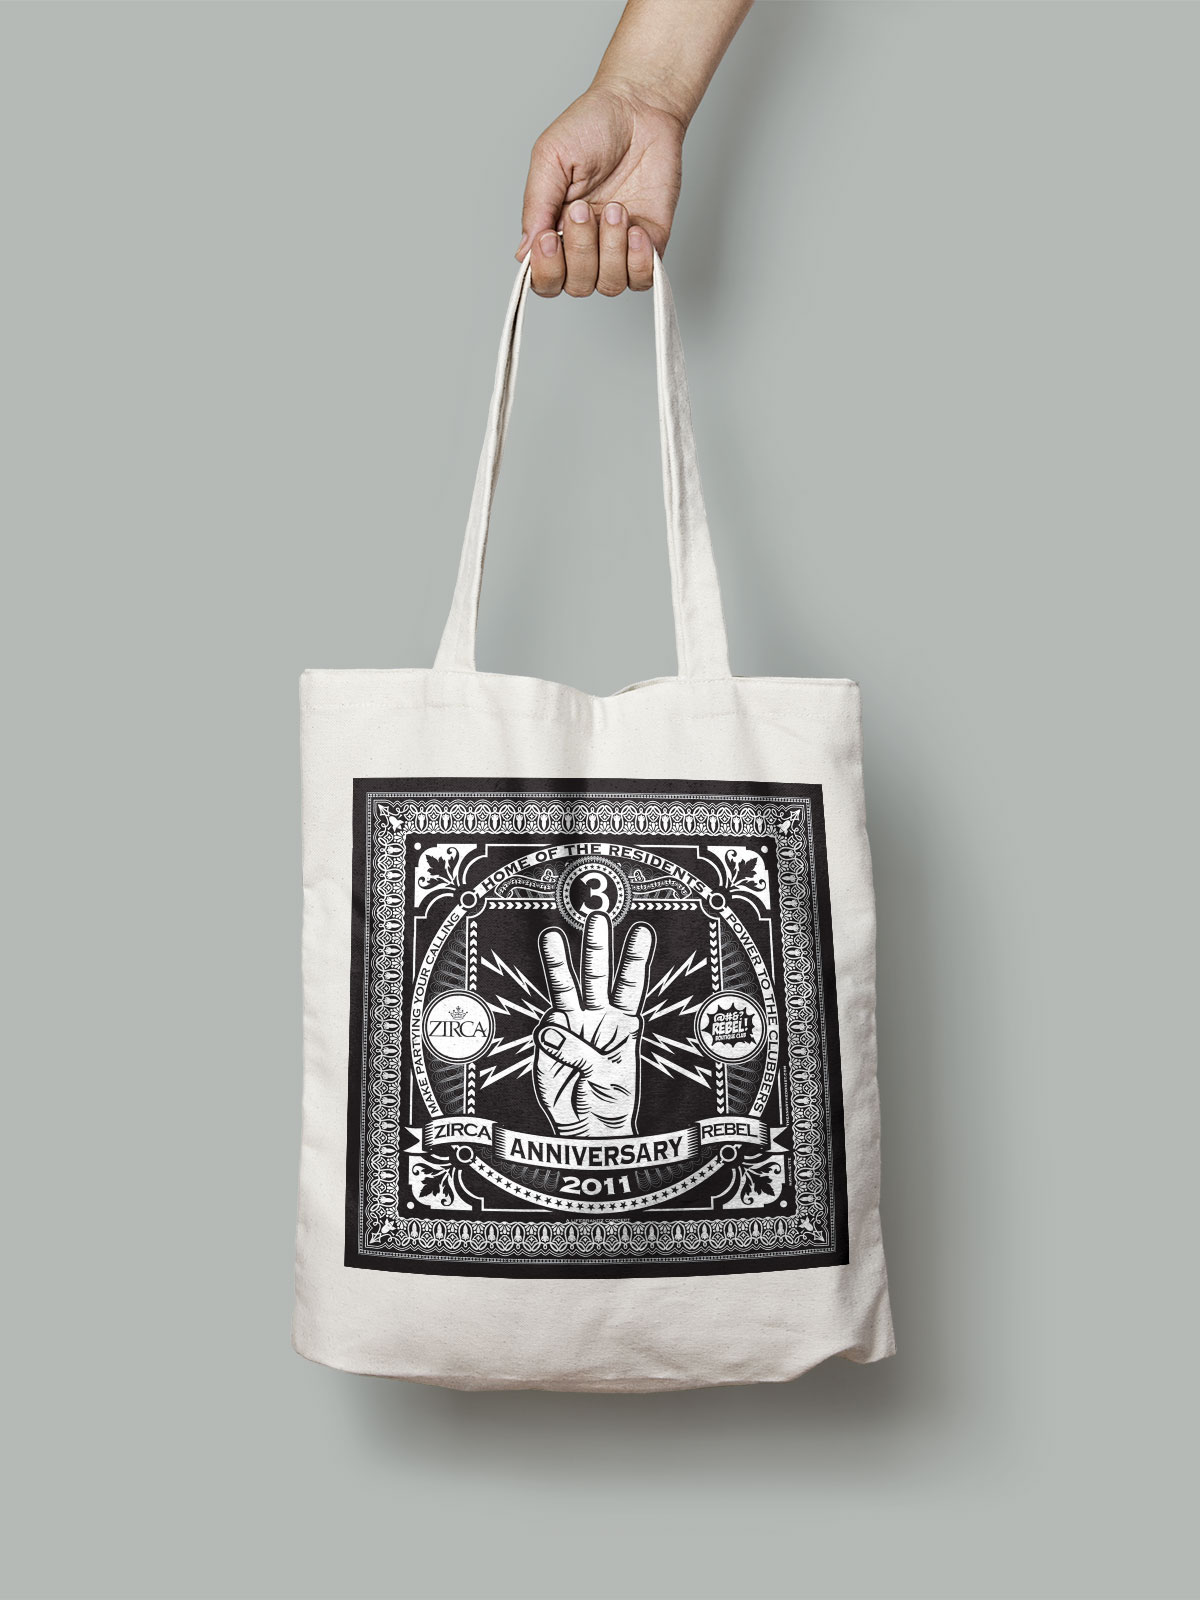 A totebag was produced to be given away as a special doorgift for the event.